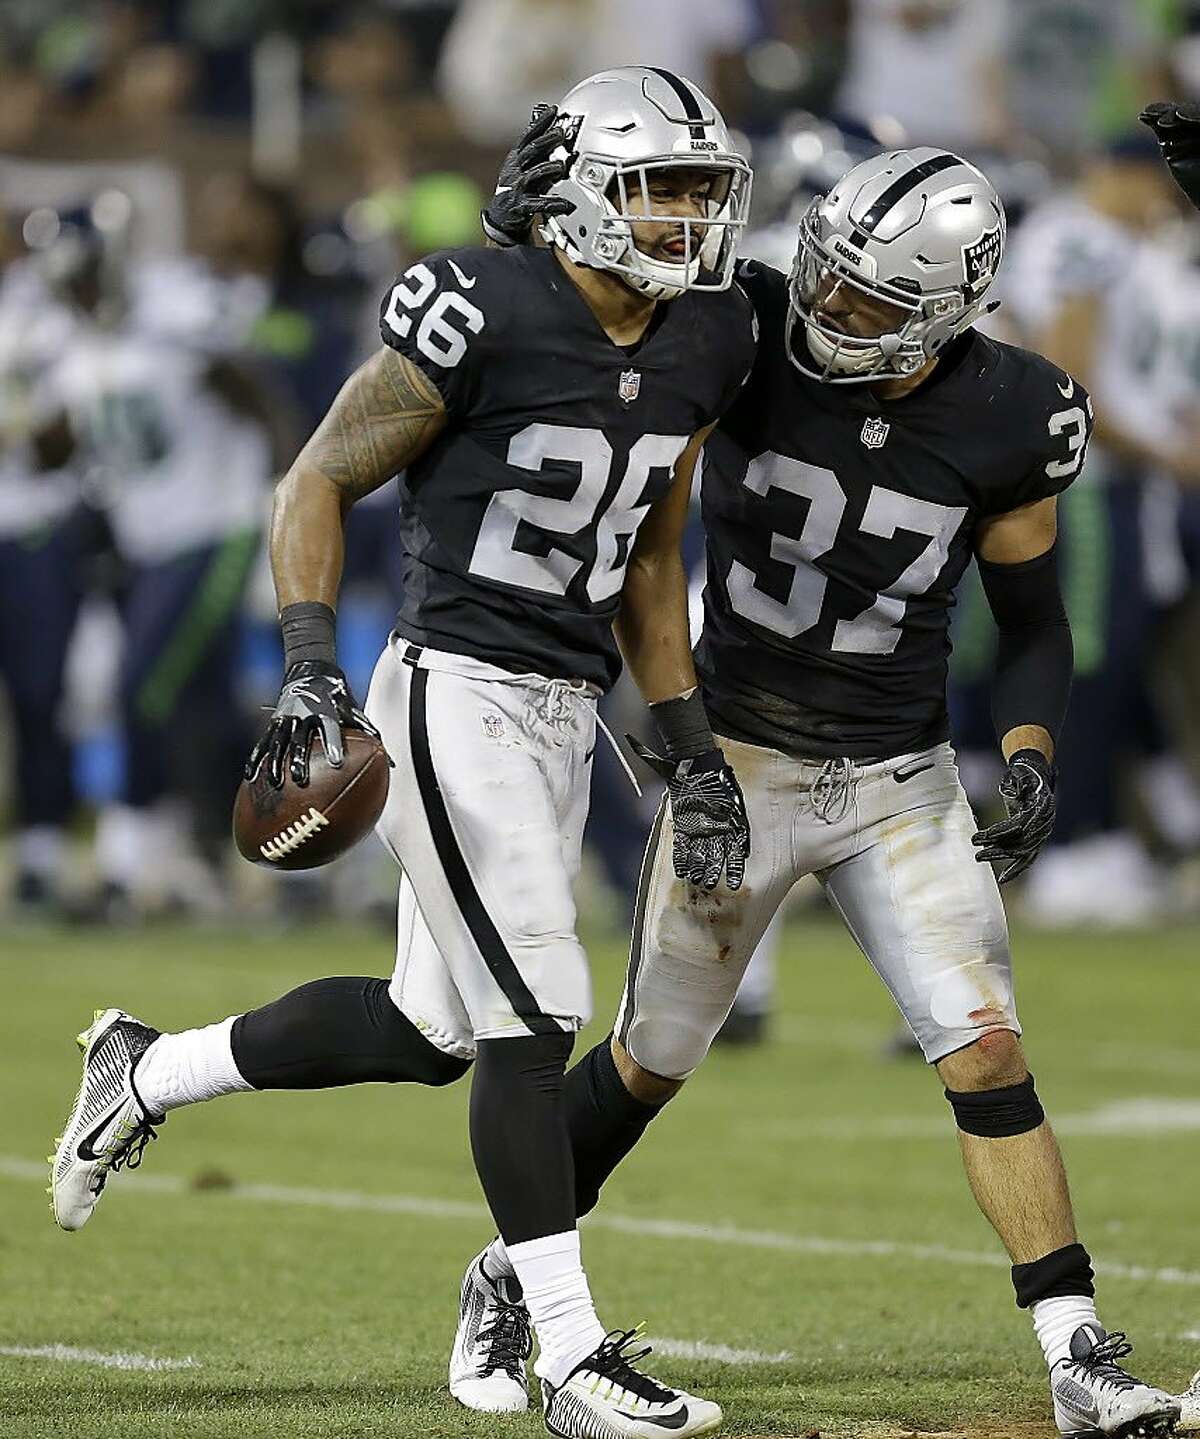 The team promoted Shalom Luani, a former Oakland Raider, from the practice squad to the 53-man roster. 